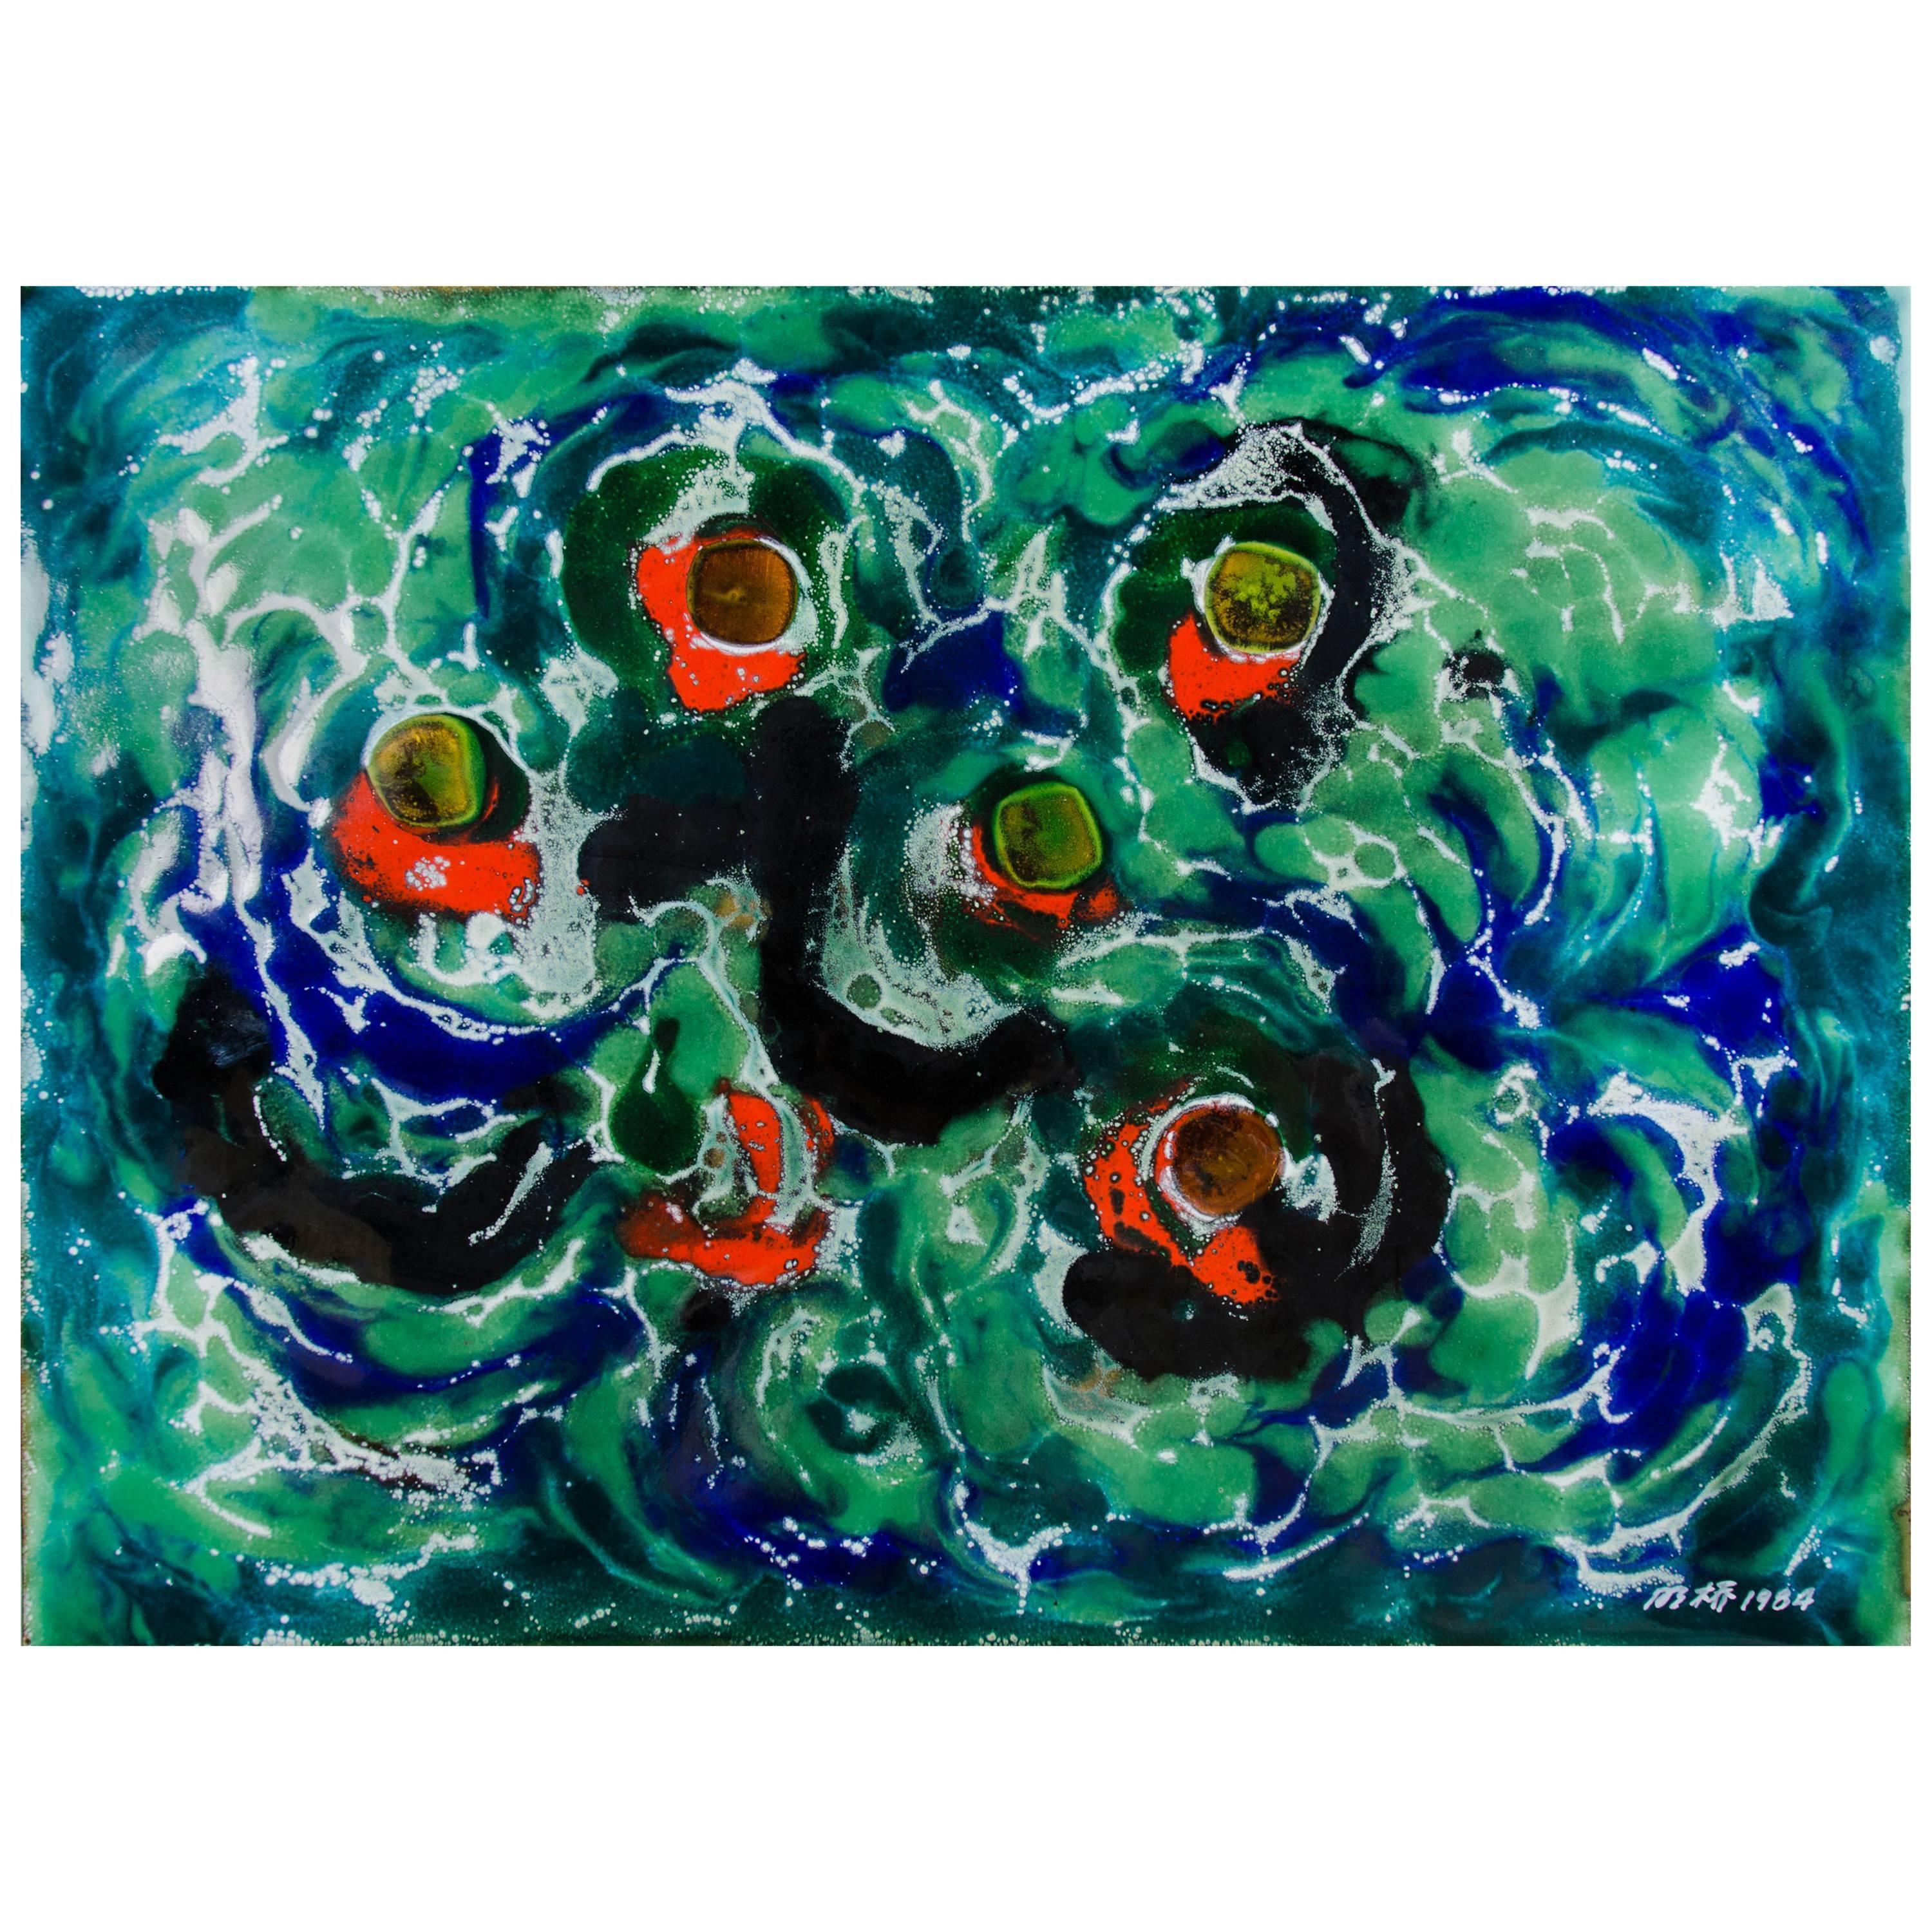 Untitled IX by Ming Chiao Kuo, Enamel Painting on Copper, 1984, Framed